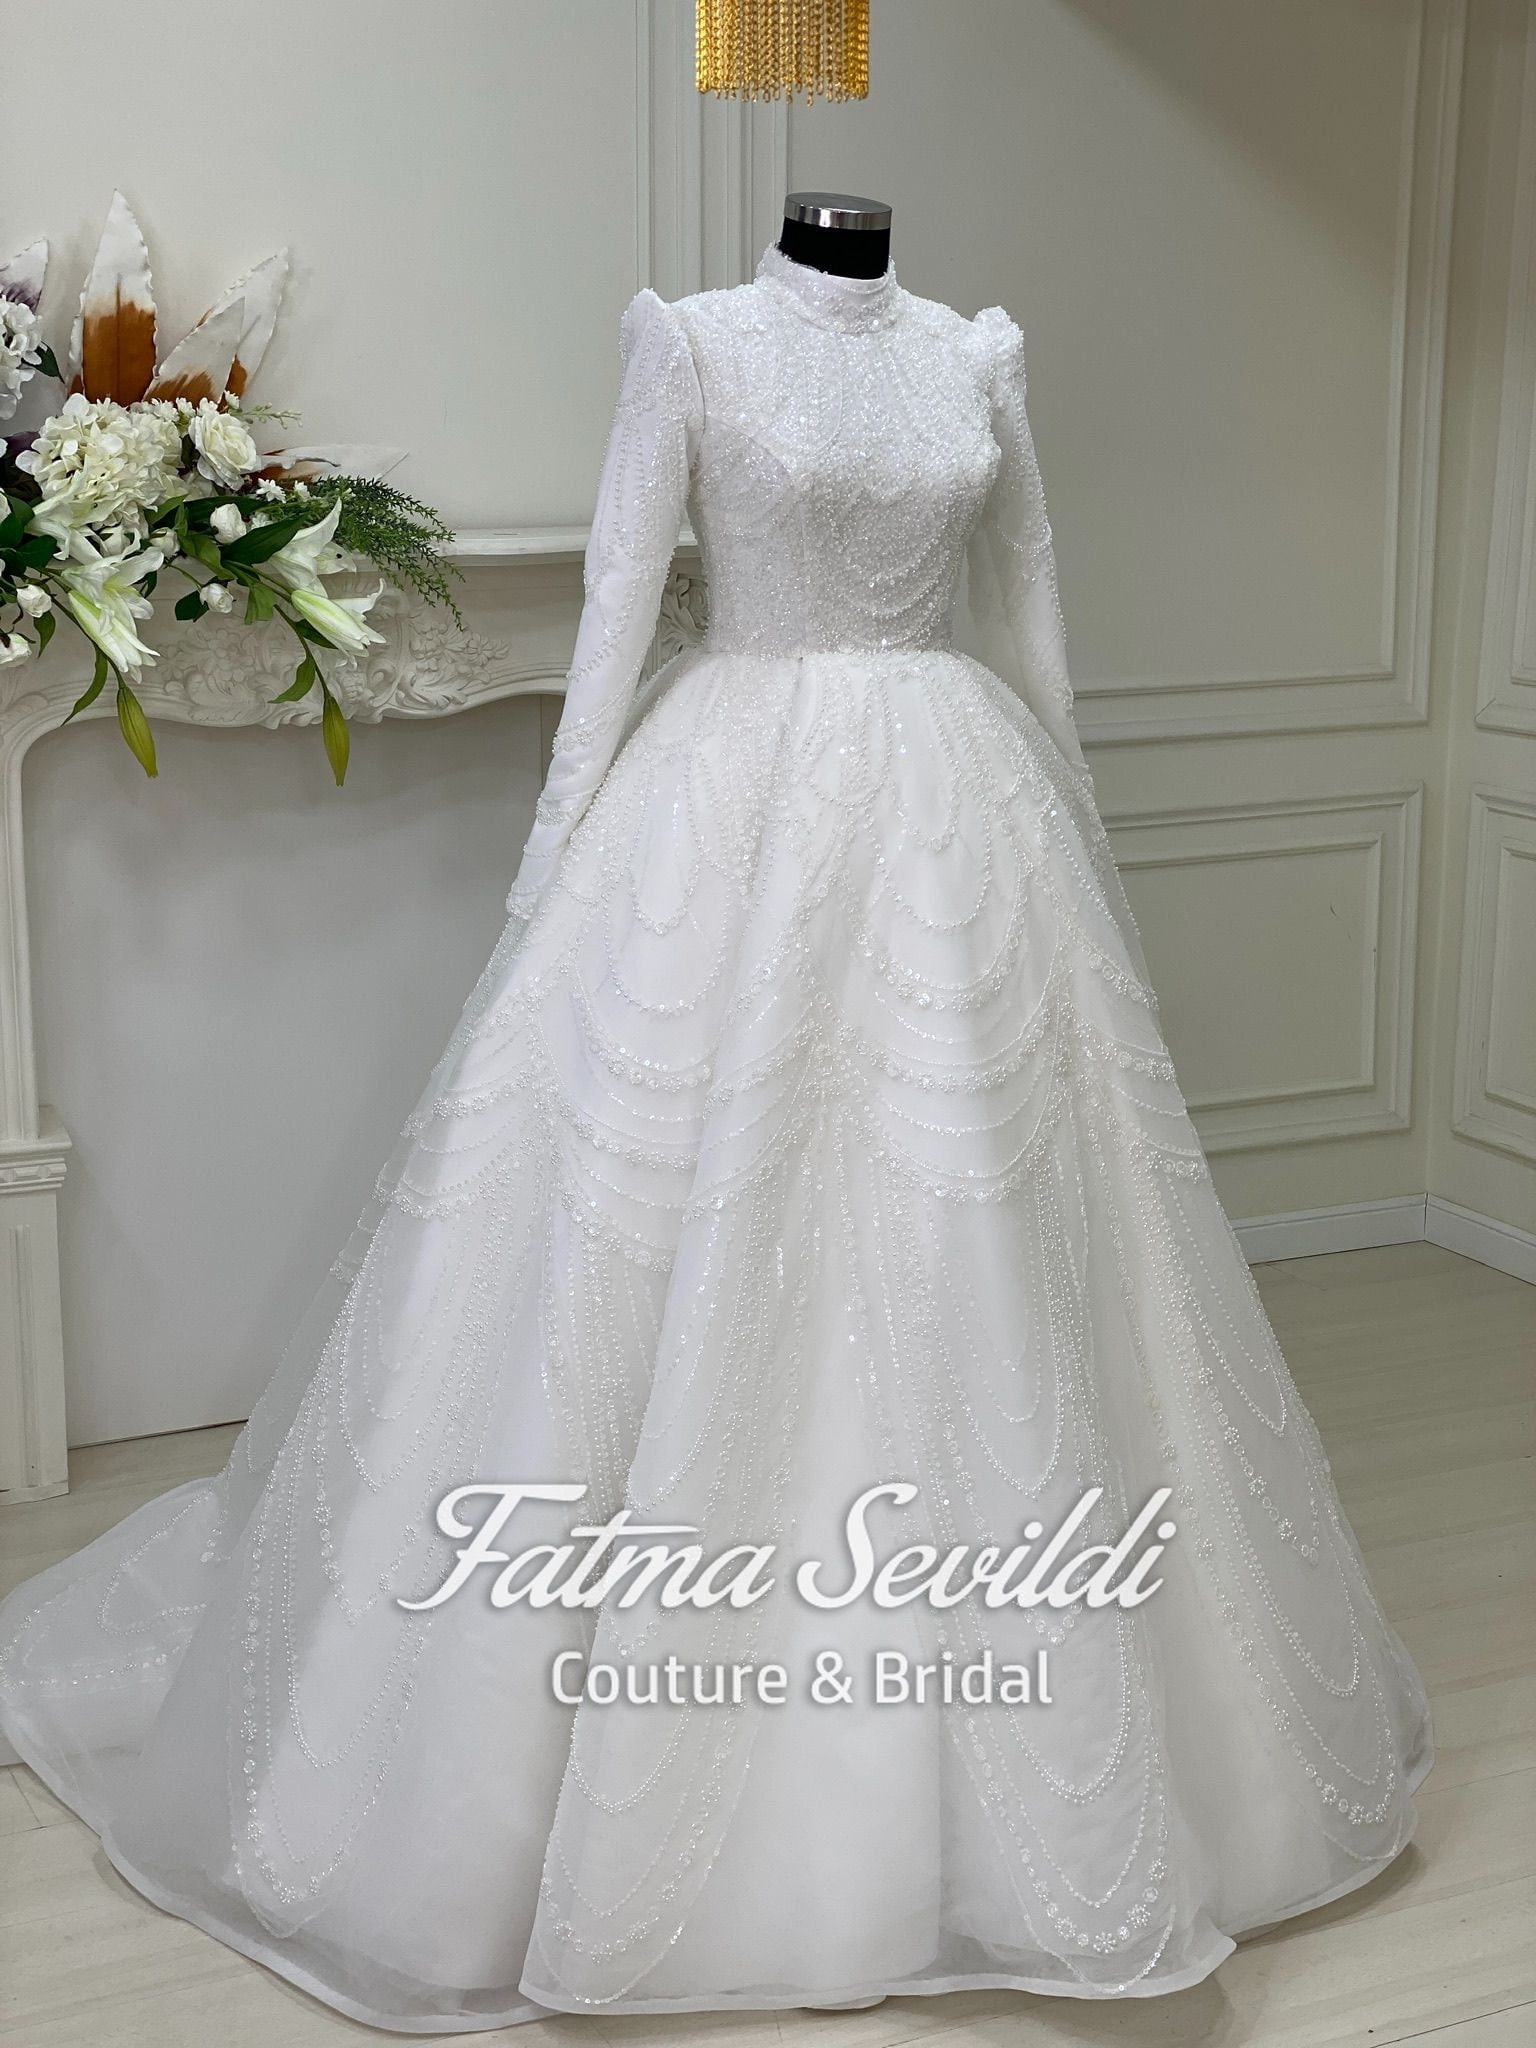 2020 Arabic Bridal Wedding Wedding Dress With Sleeves In Dubai Halter Neck,  Sexy Back Design, High Quality Lace And Tulle For Women From Dress_1st,  $296.69 | DHgate.Com